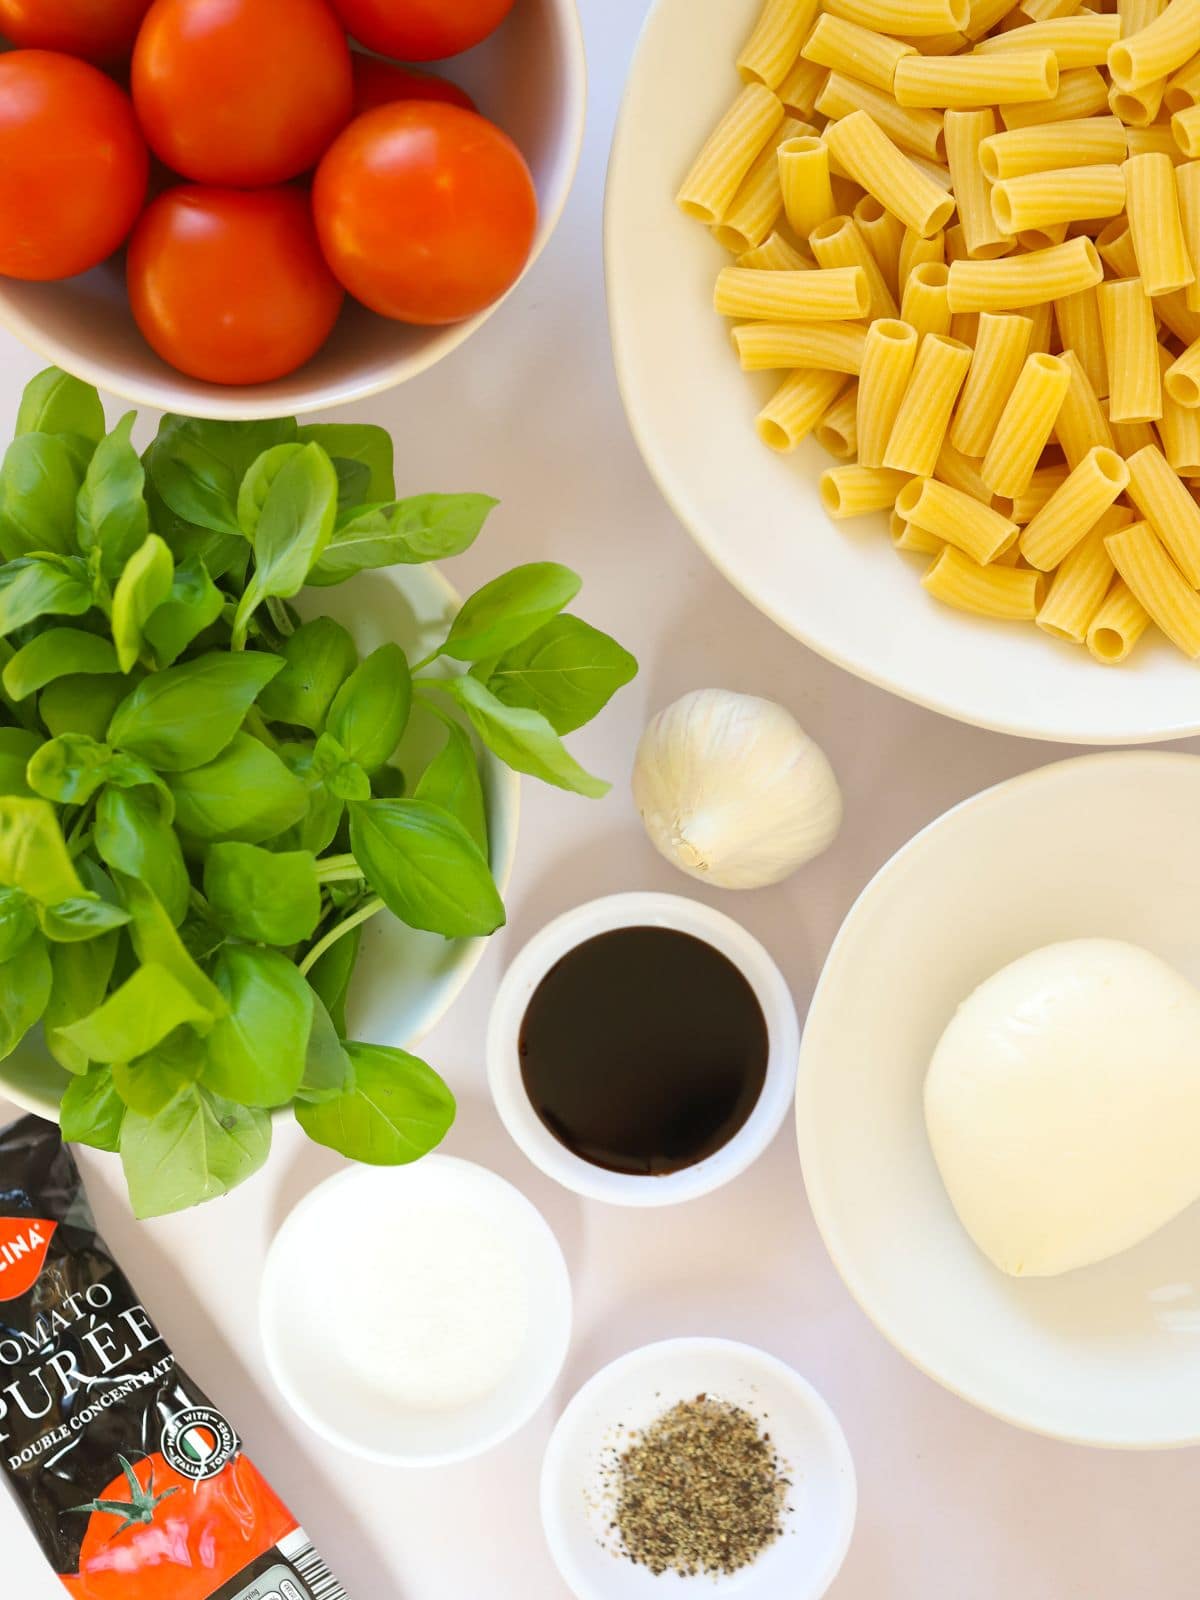 The ingredients for Tomato and Basil Pasta laid out on a counter.